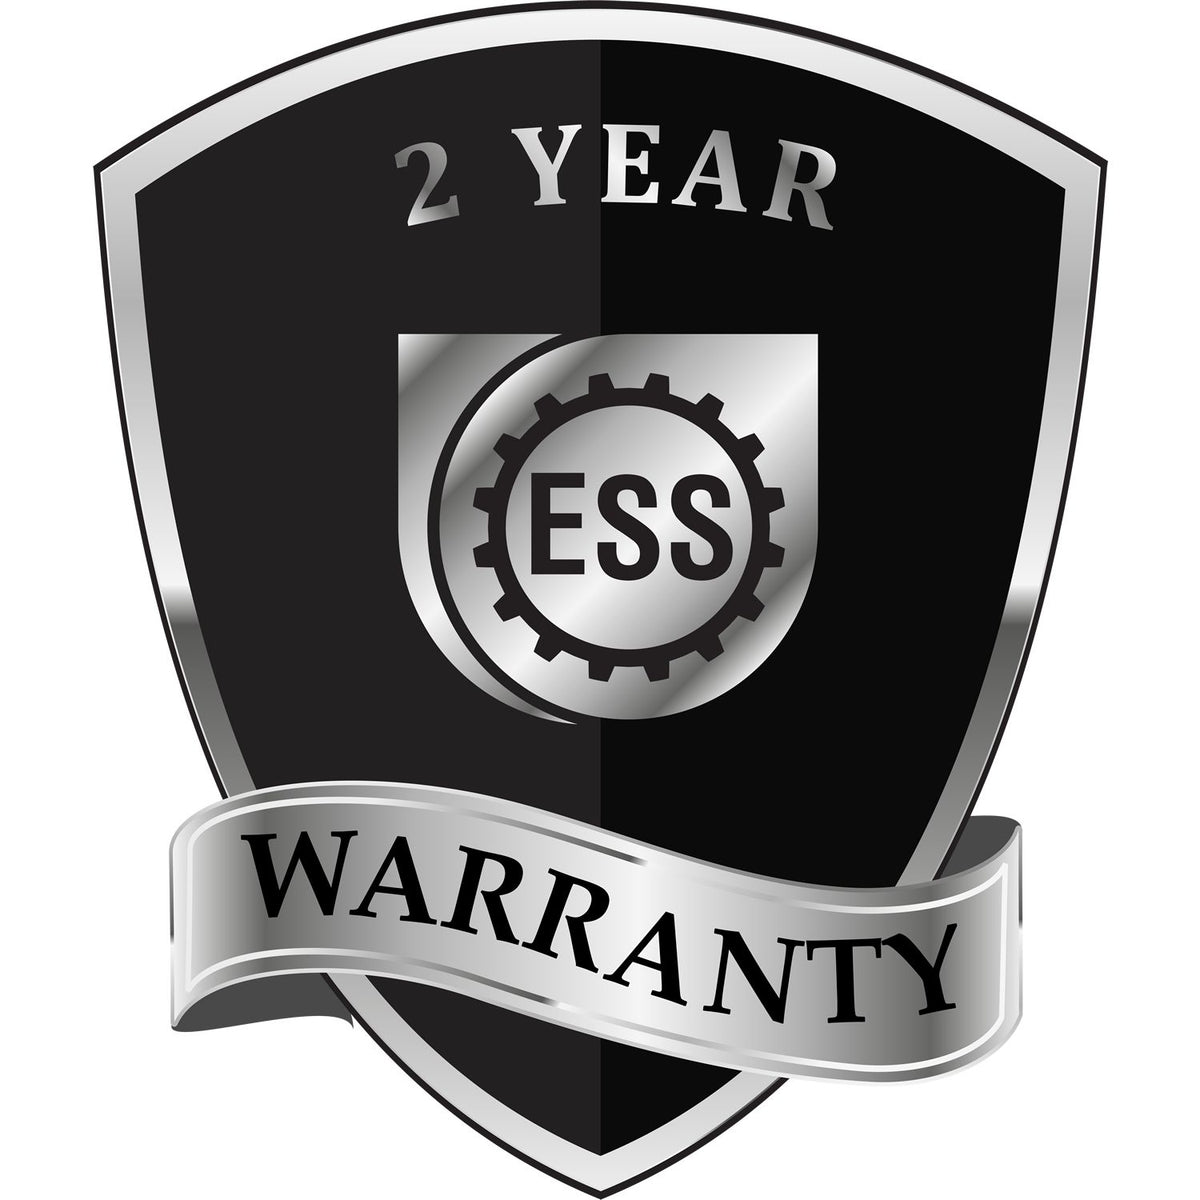 A black and silver badge or emblem showing warranty information for the Gift Texas Architect Seal